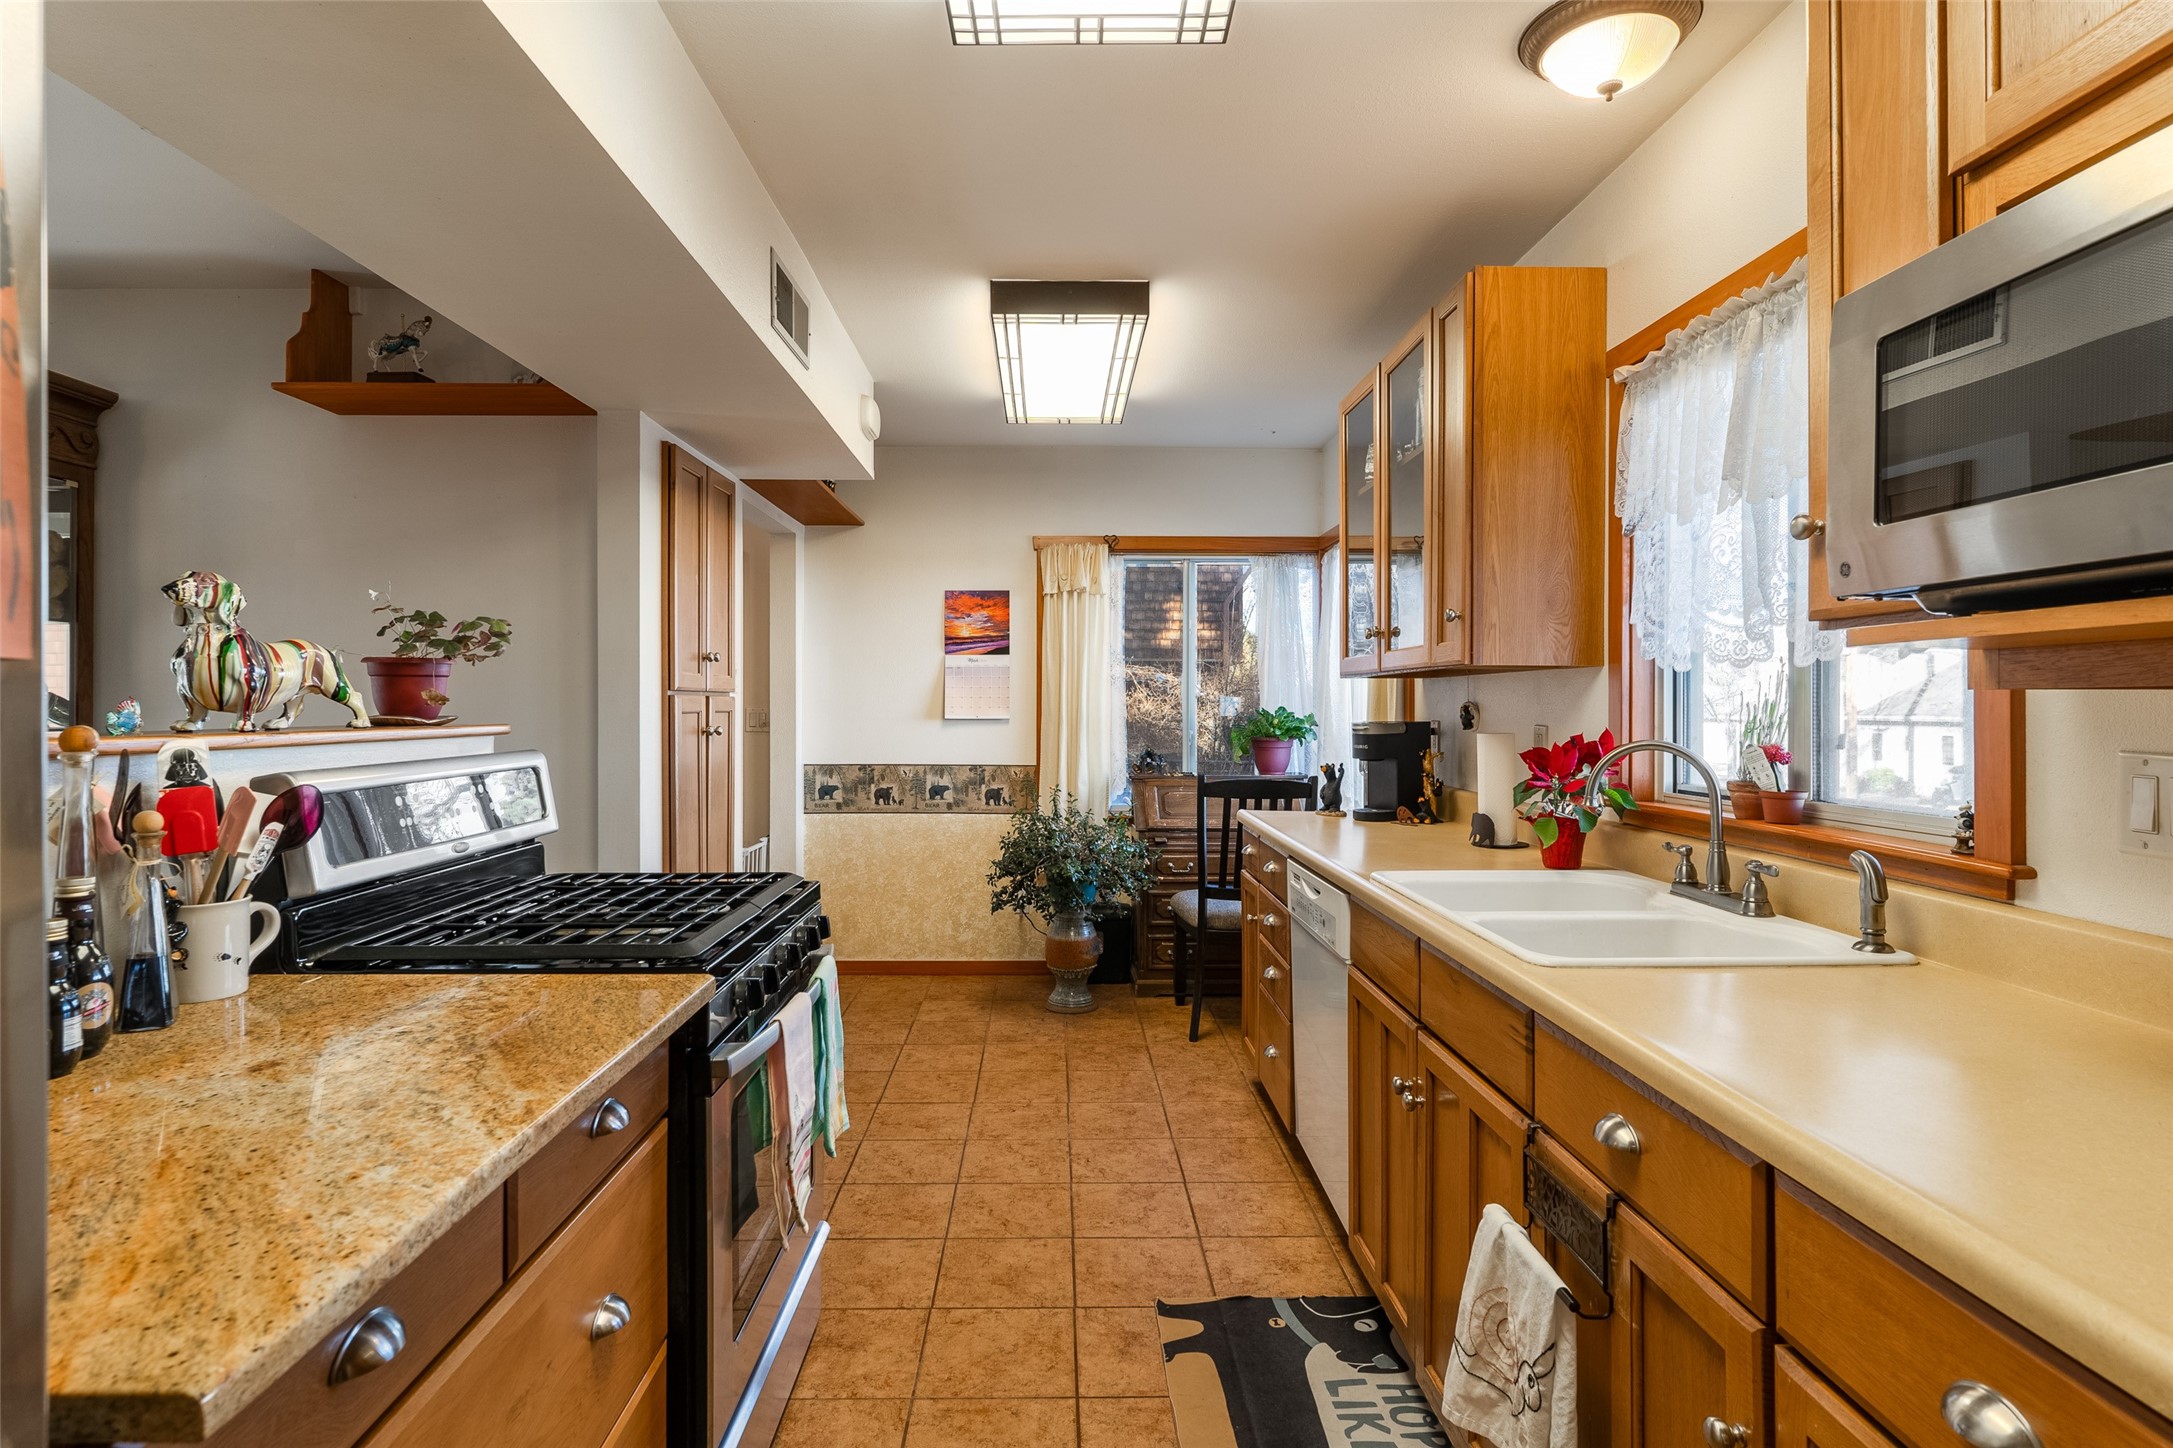 2021 45th B, Los Alamos, New Mexico 87544, 3 Bedrooms Bedrooms, ,2 BathroomsBathrooms,Residential,For Sale,2021 45th B,202400744